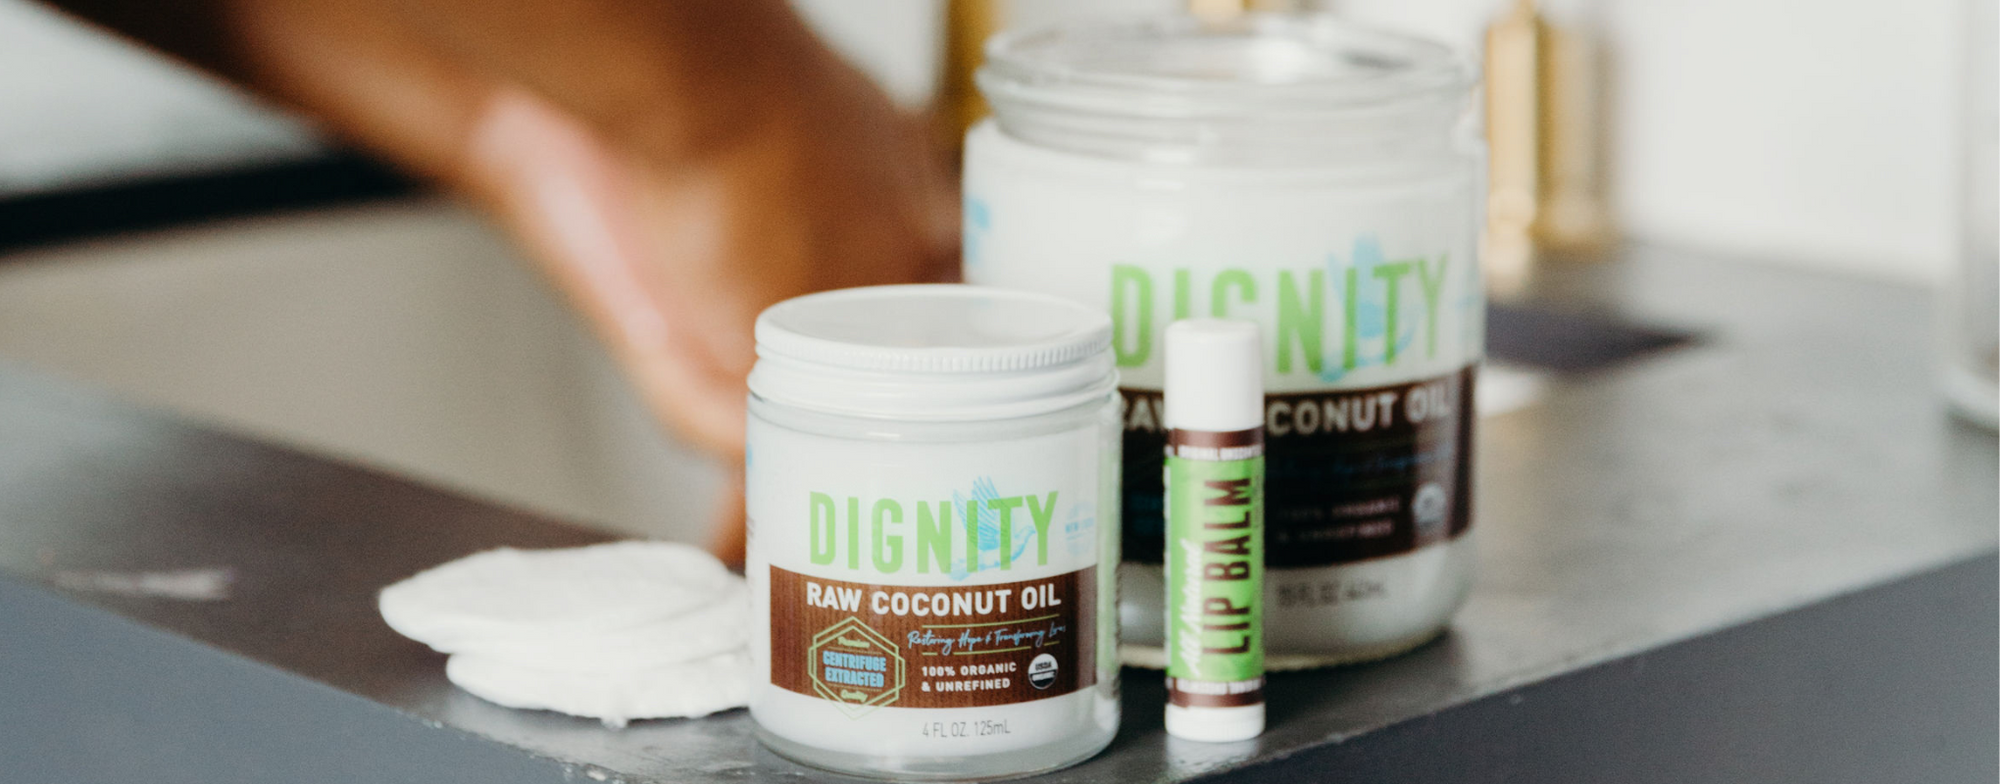 10 Beauty Benefits of Coconut Oil and How to Use it in Your Skincare Routine